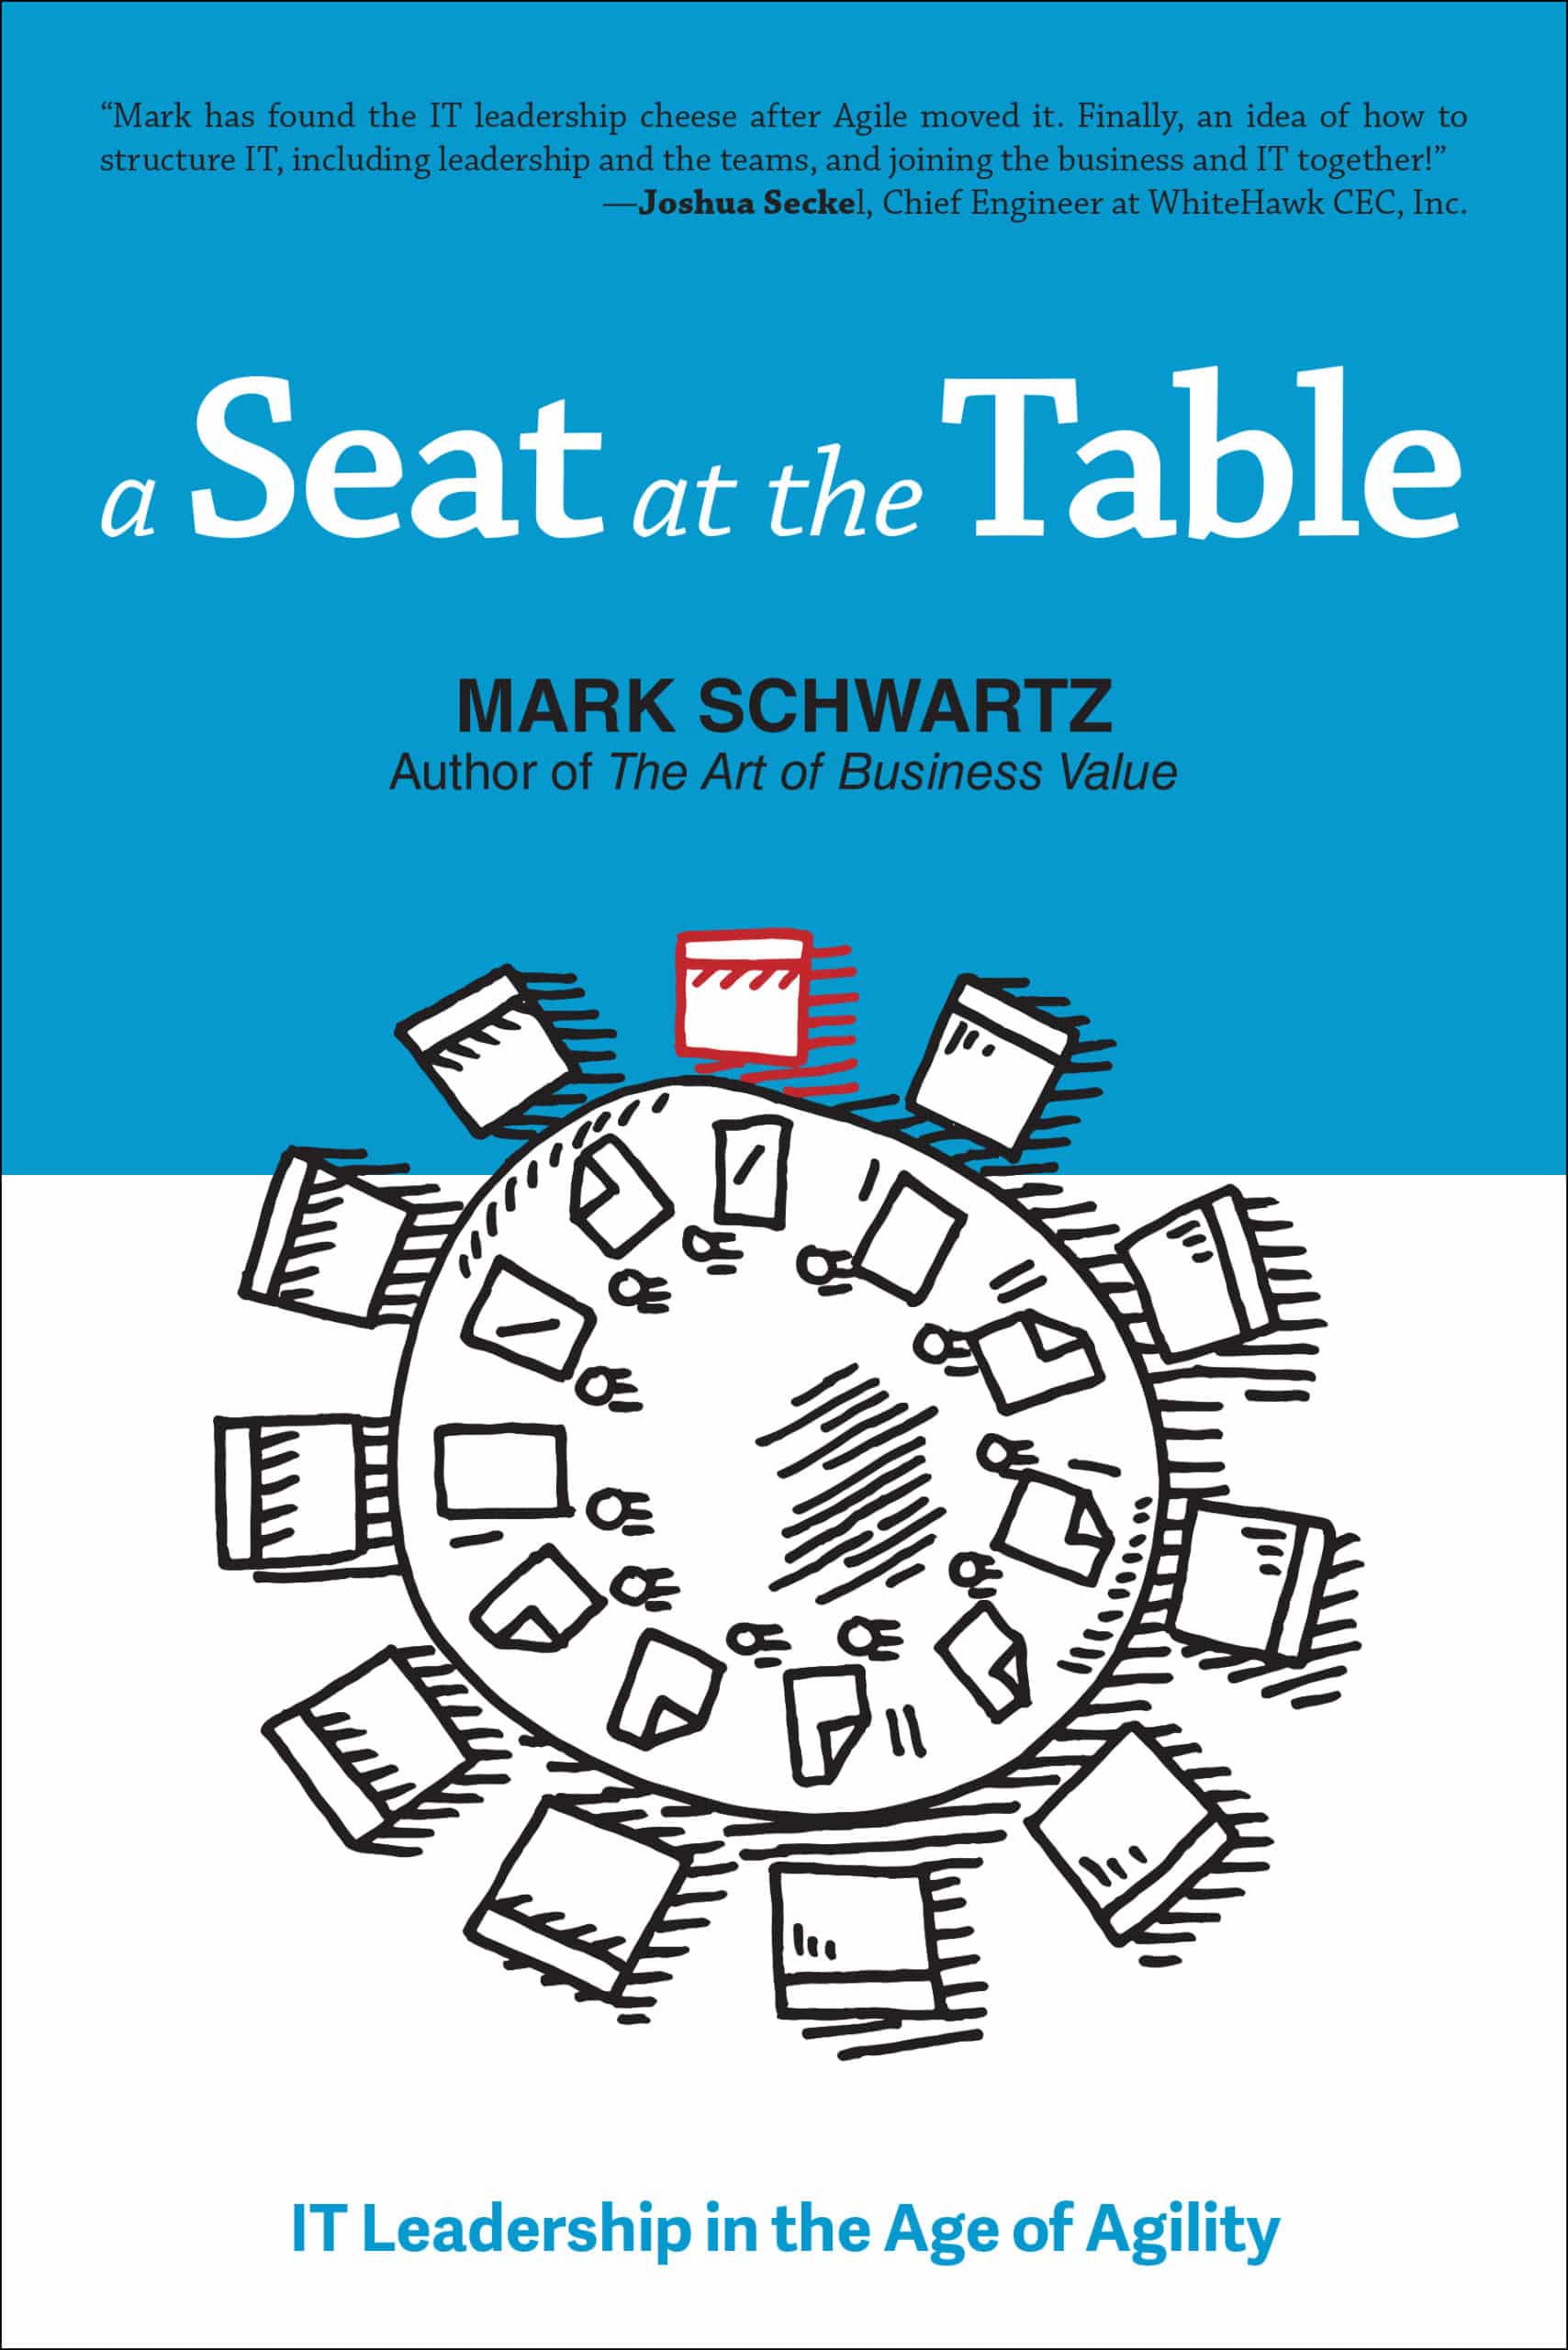 Cover of A Seat at the Table: IT Leadership in the Age of Agility by Mark Schwartz, a guide to strategy and planning within an Agile context.